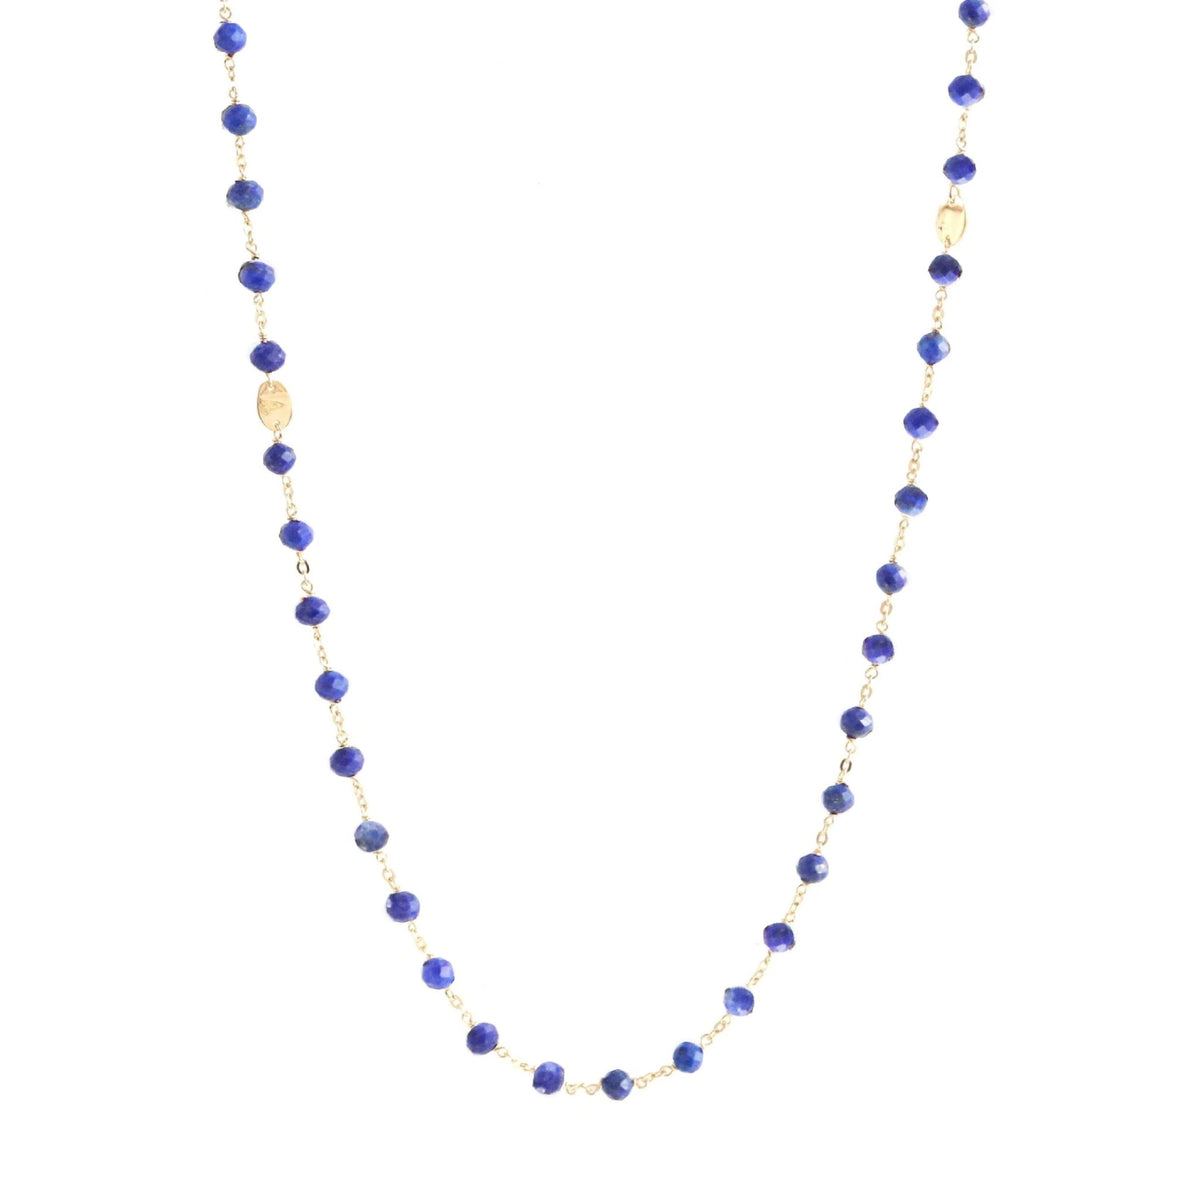 ICONIC LONG BEADED NECKLACE - LAPIS &amp; GOLD 34&quot; - SO PRETTY CARA COTTER